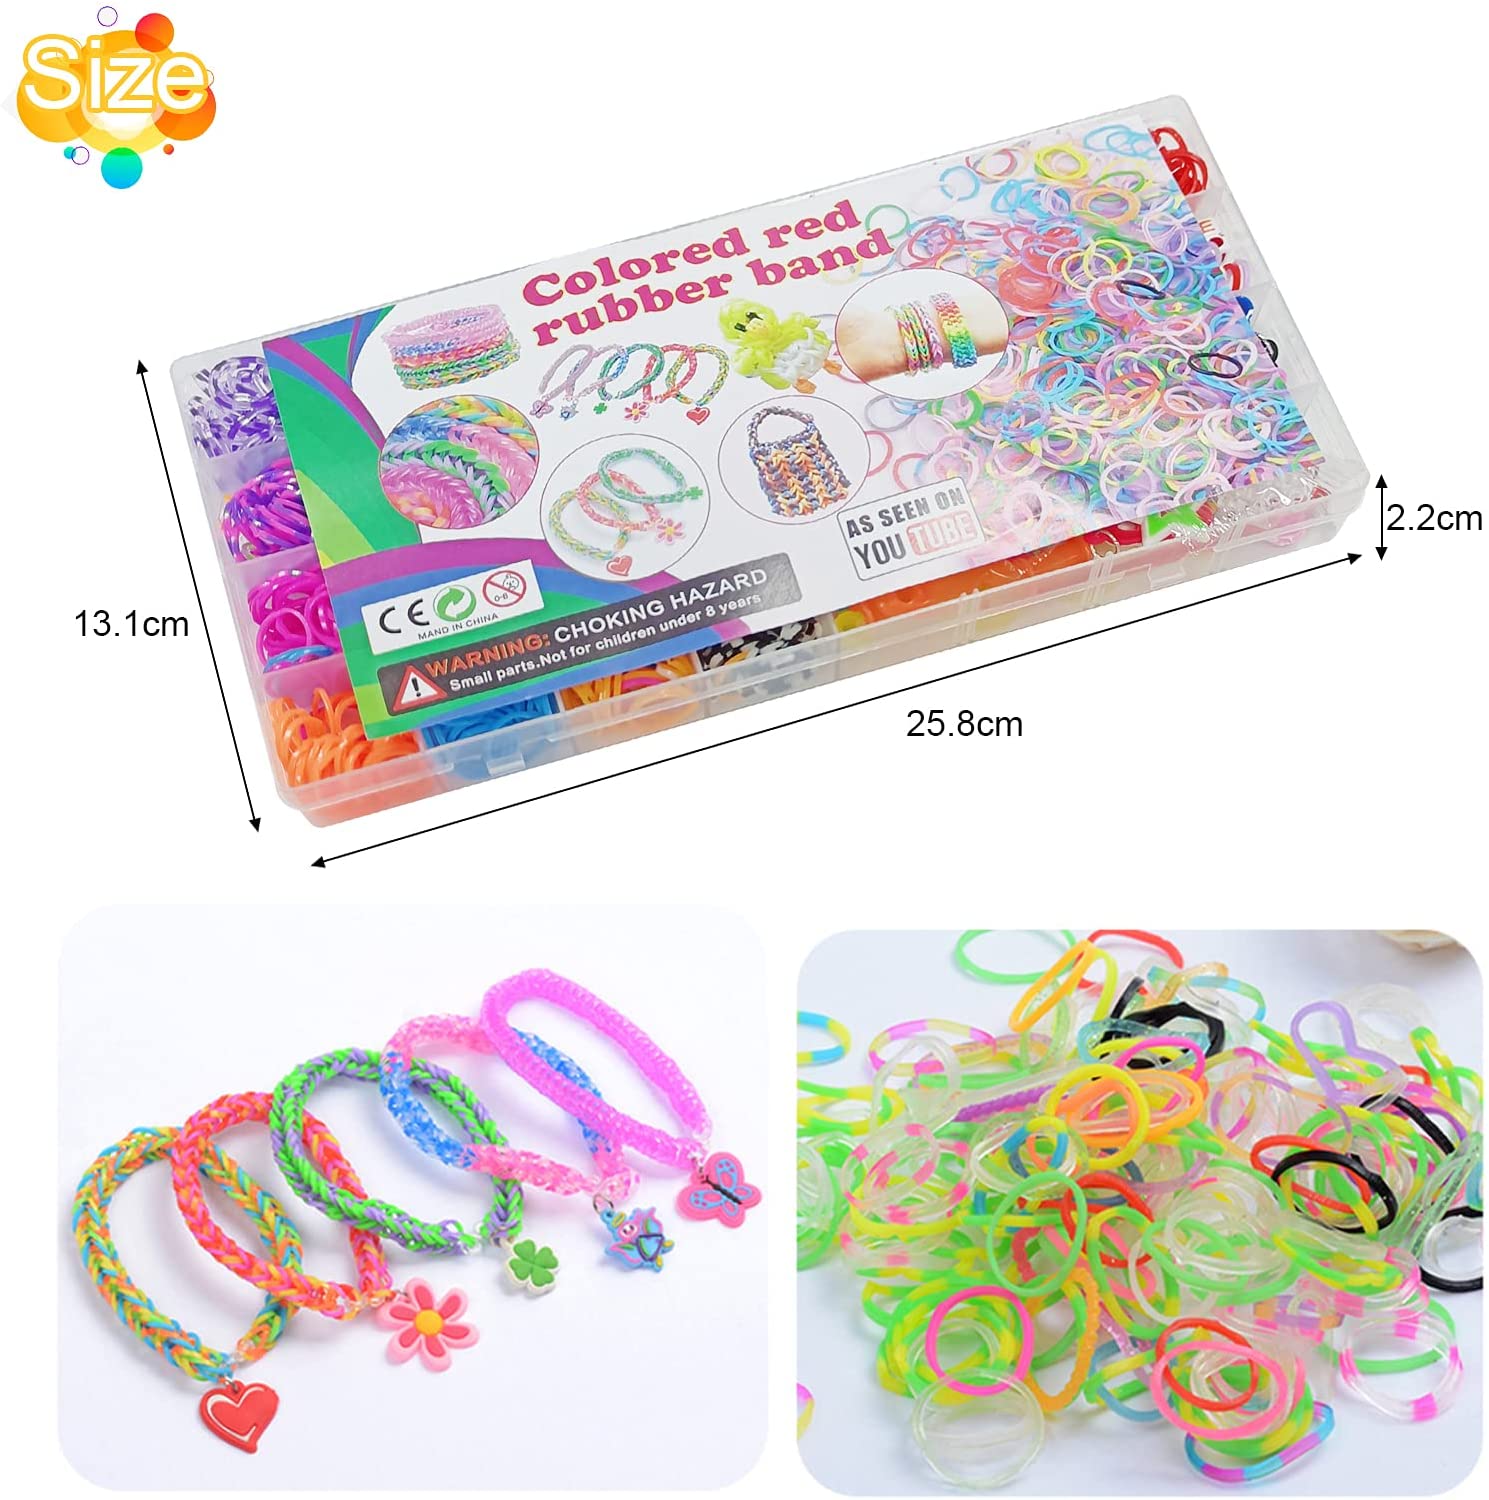 Rubber Bands Kits Bracelet Making Kit for Girls Rubber Bands Kits with  Storage Container 23 Colors DIY Birthday Gift for Girl Craft Kits for Kids  Friendship Gift 